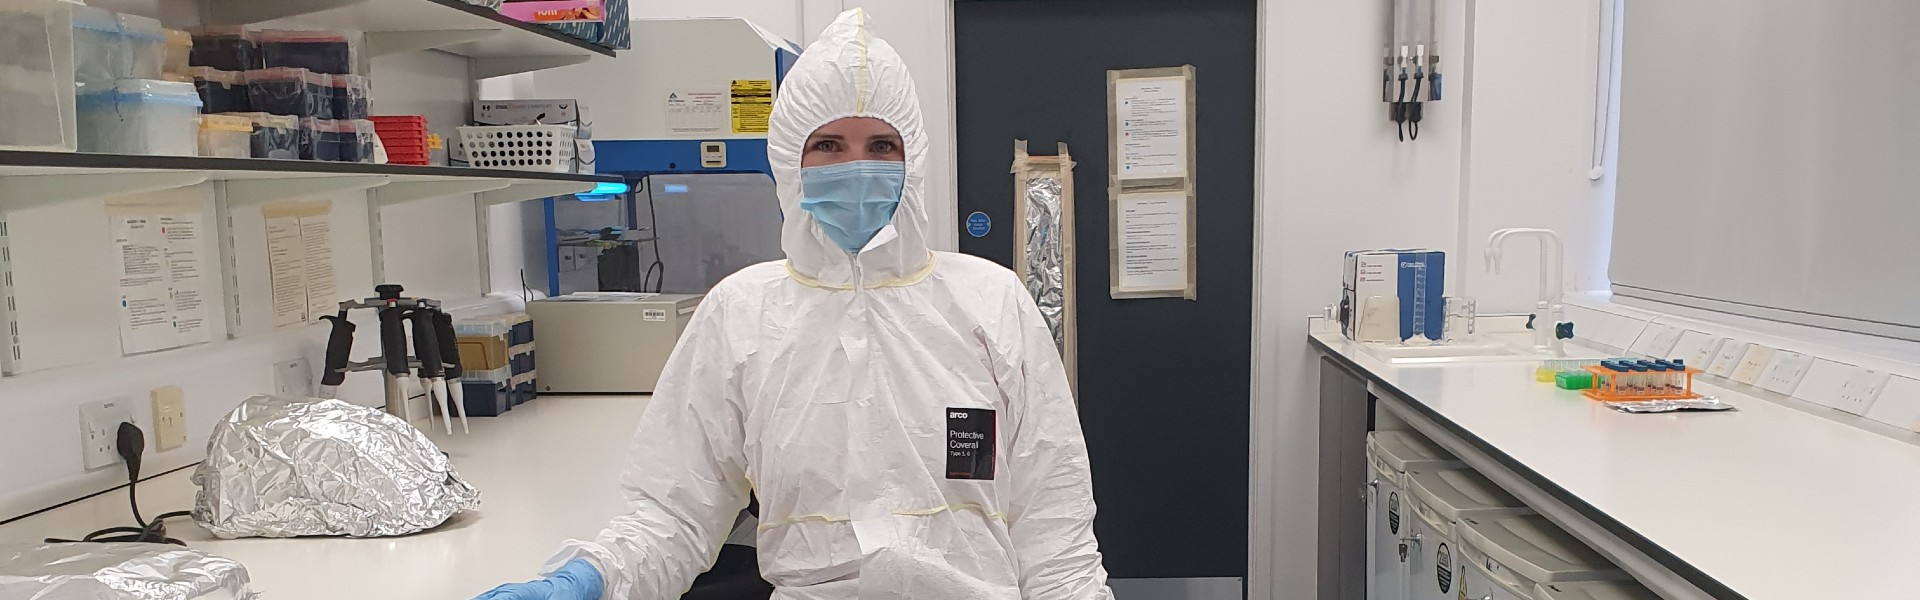 Photo of Holly Broadhurst fully covered with protective suits, masks and gloves